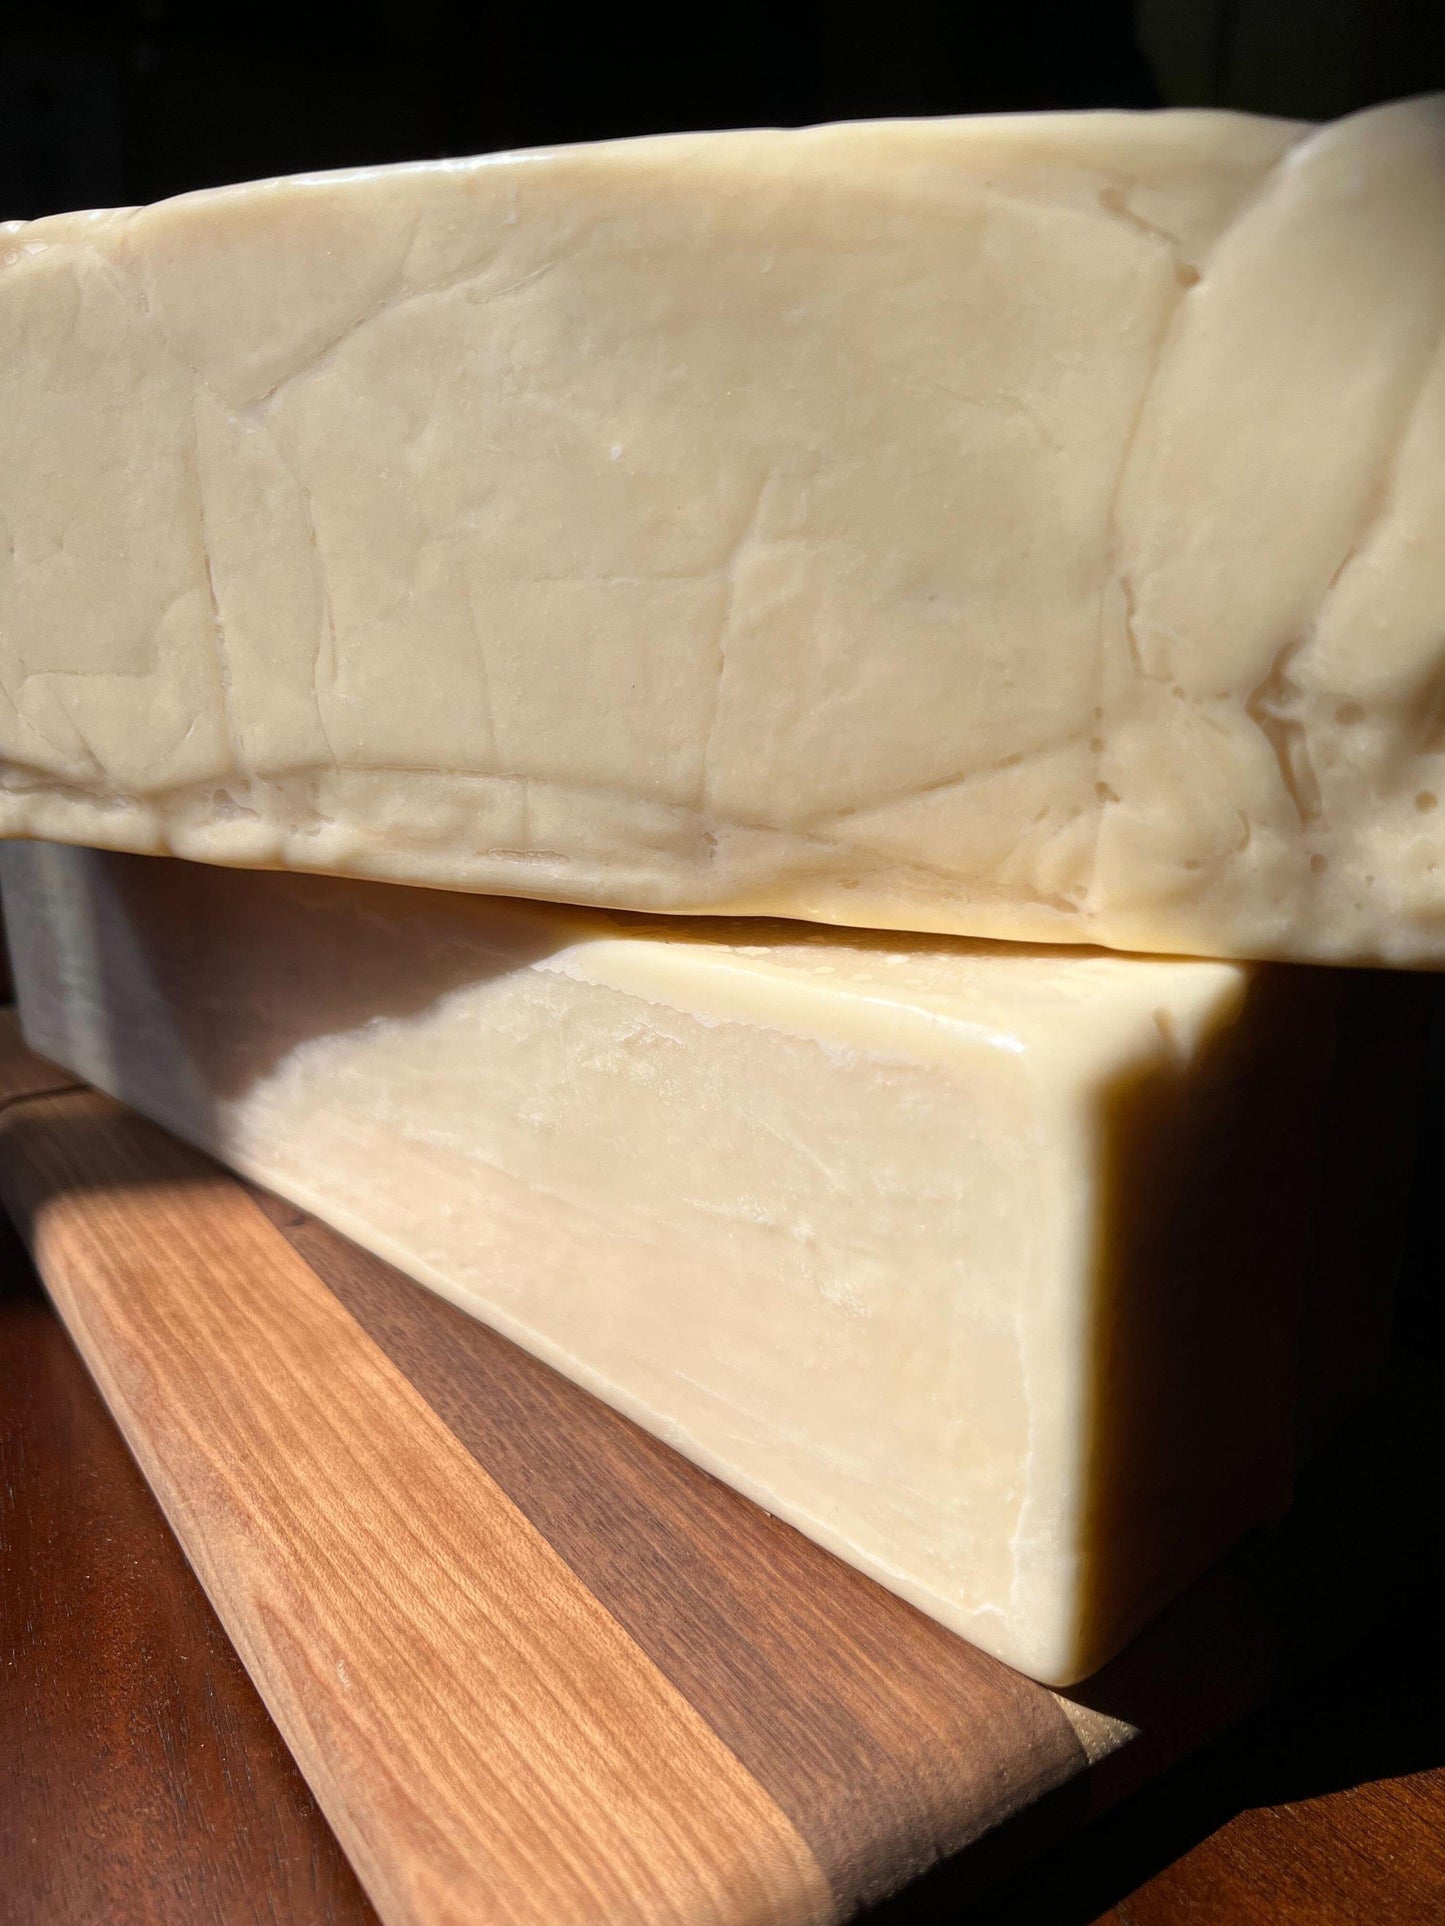 House - Aged White Cheddar, Aged 5 Years